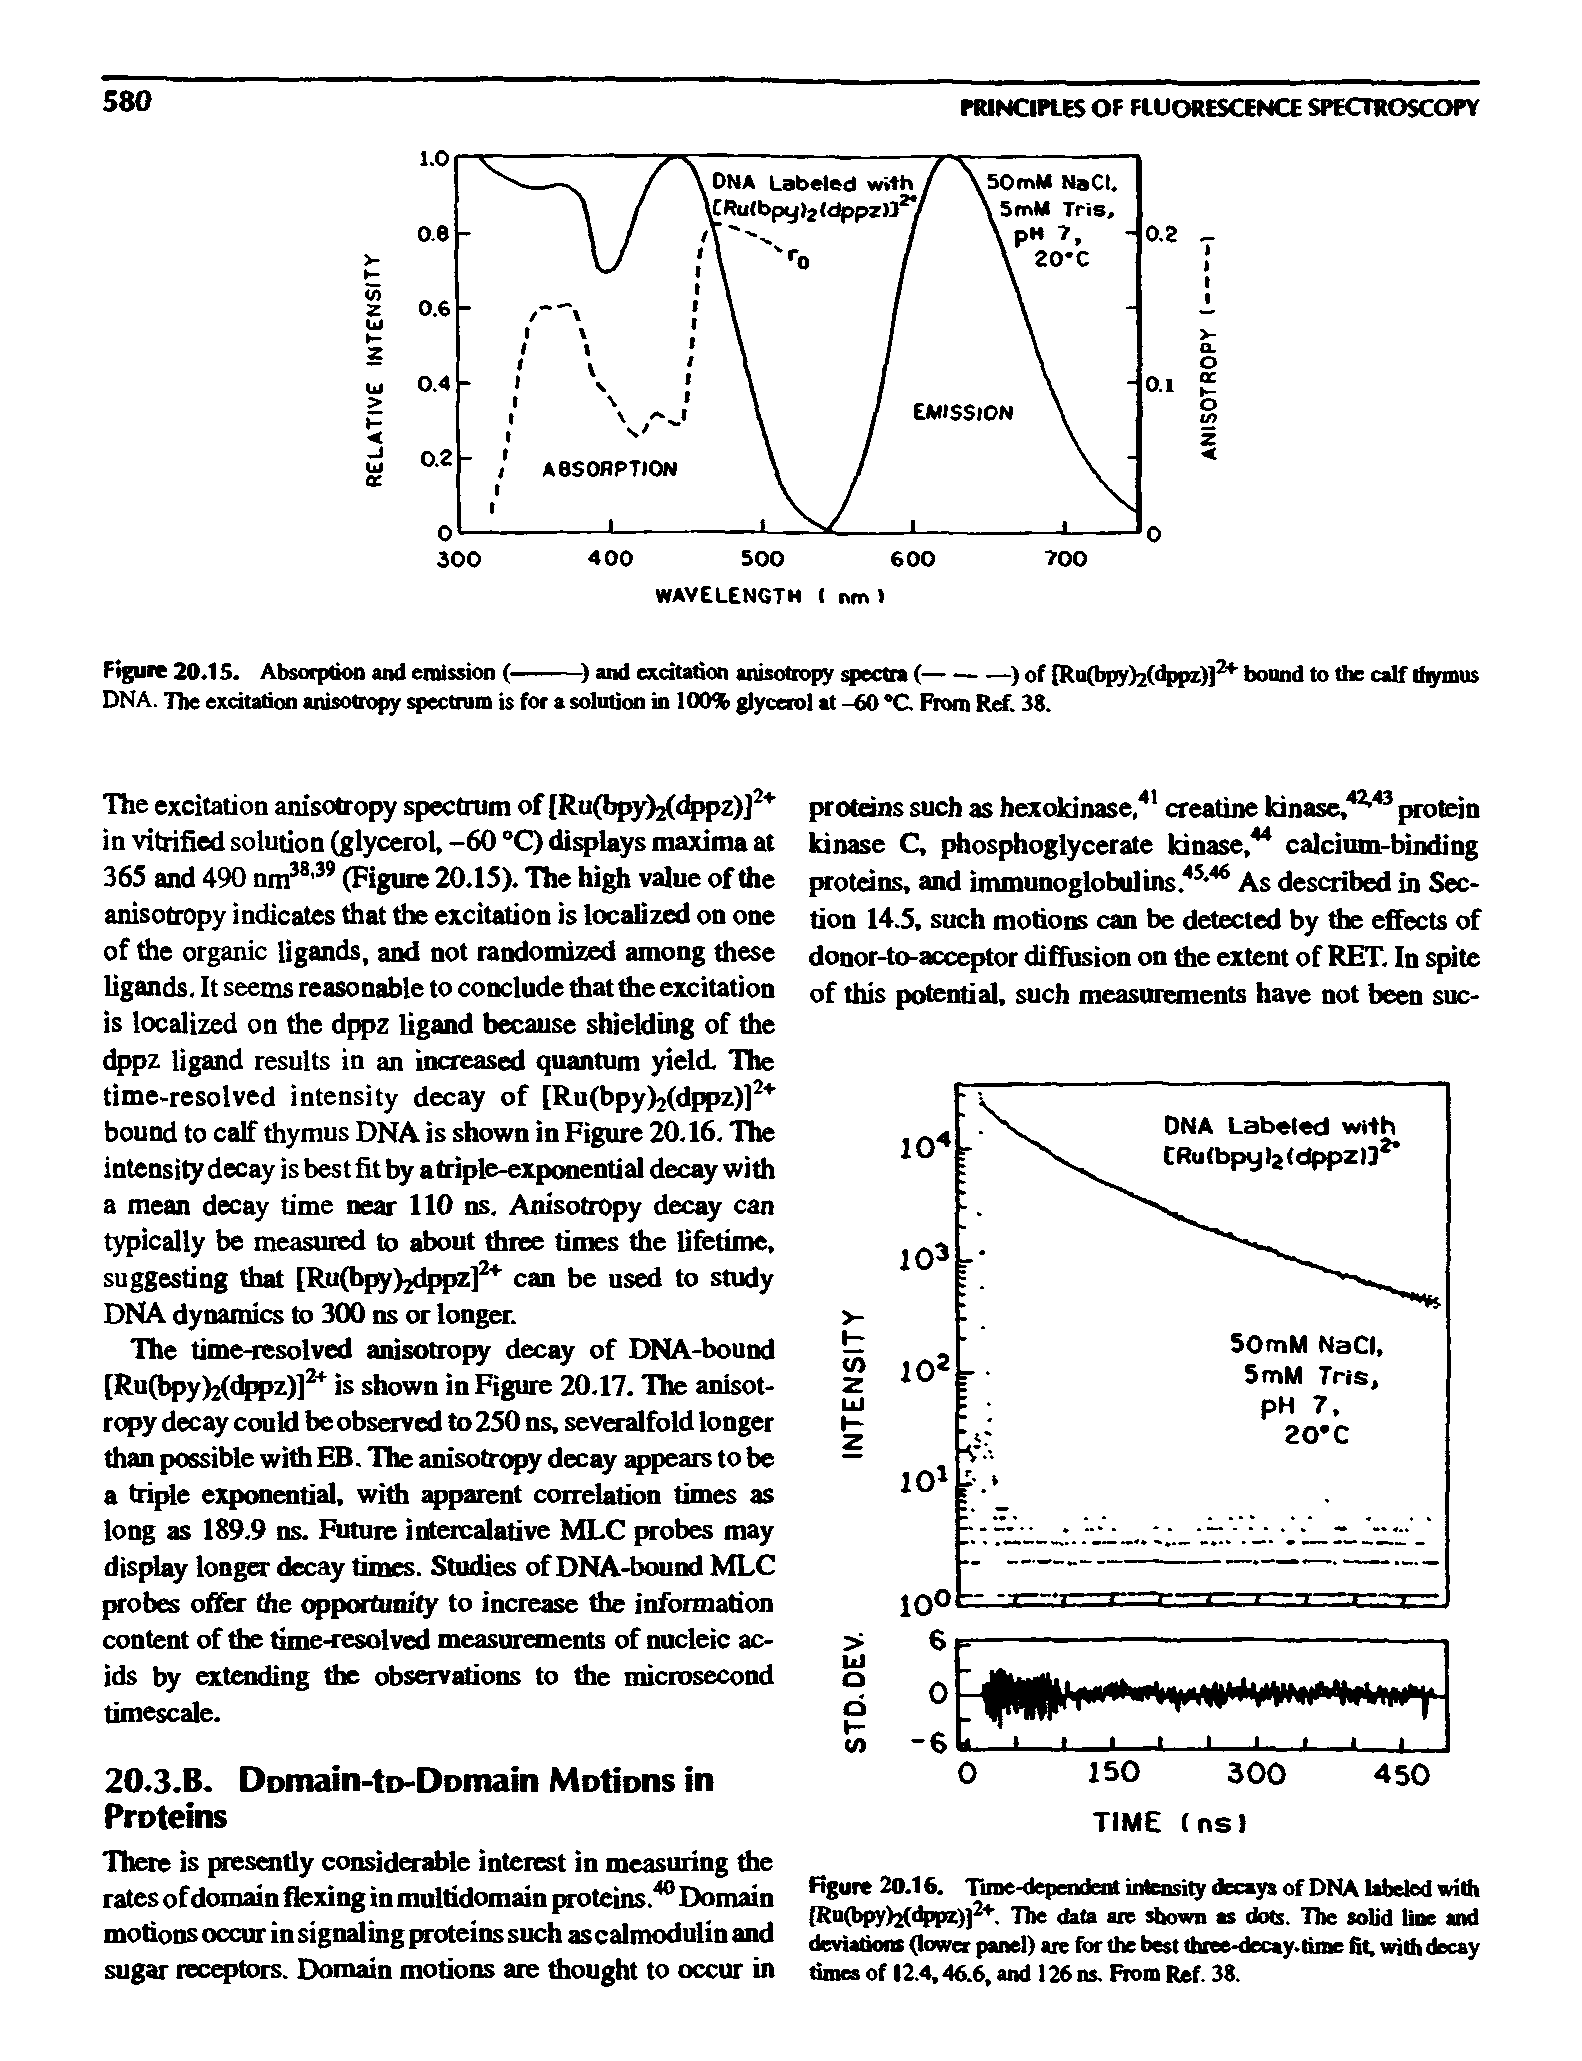 Figure 2o.16. Hine-dependait intensity dccmys of DNA labeled with 71>e data are sbown as dots. Tbe solid line and deviations (lower panel) are for the best thtee decay.linie fit, with decay dines of 12.4,46.6, and 126 ns. Bom Ref. 38.